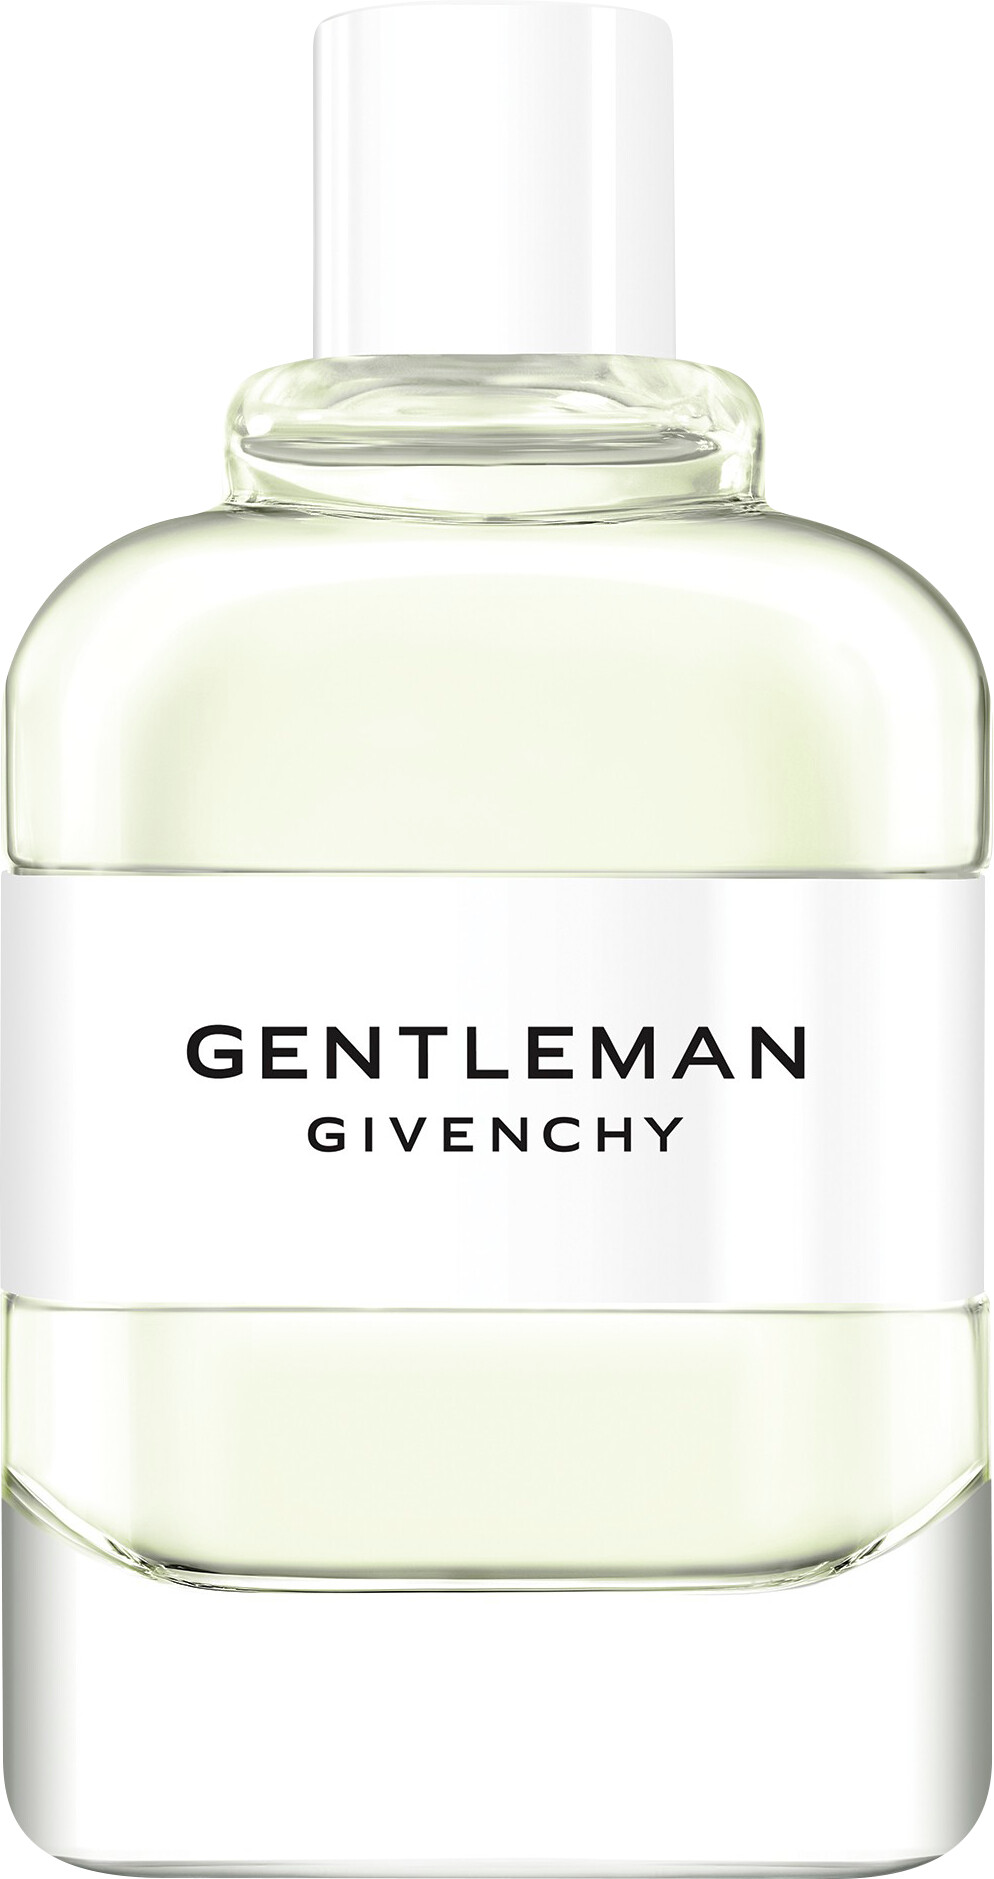 gentleman cologne givenchy